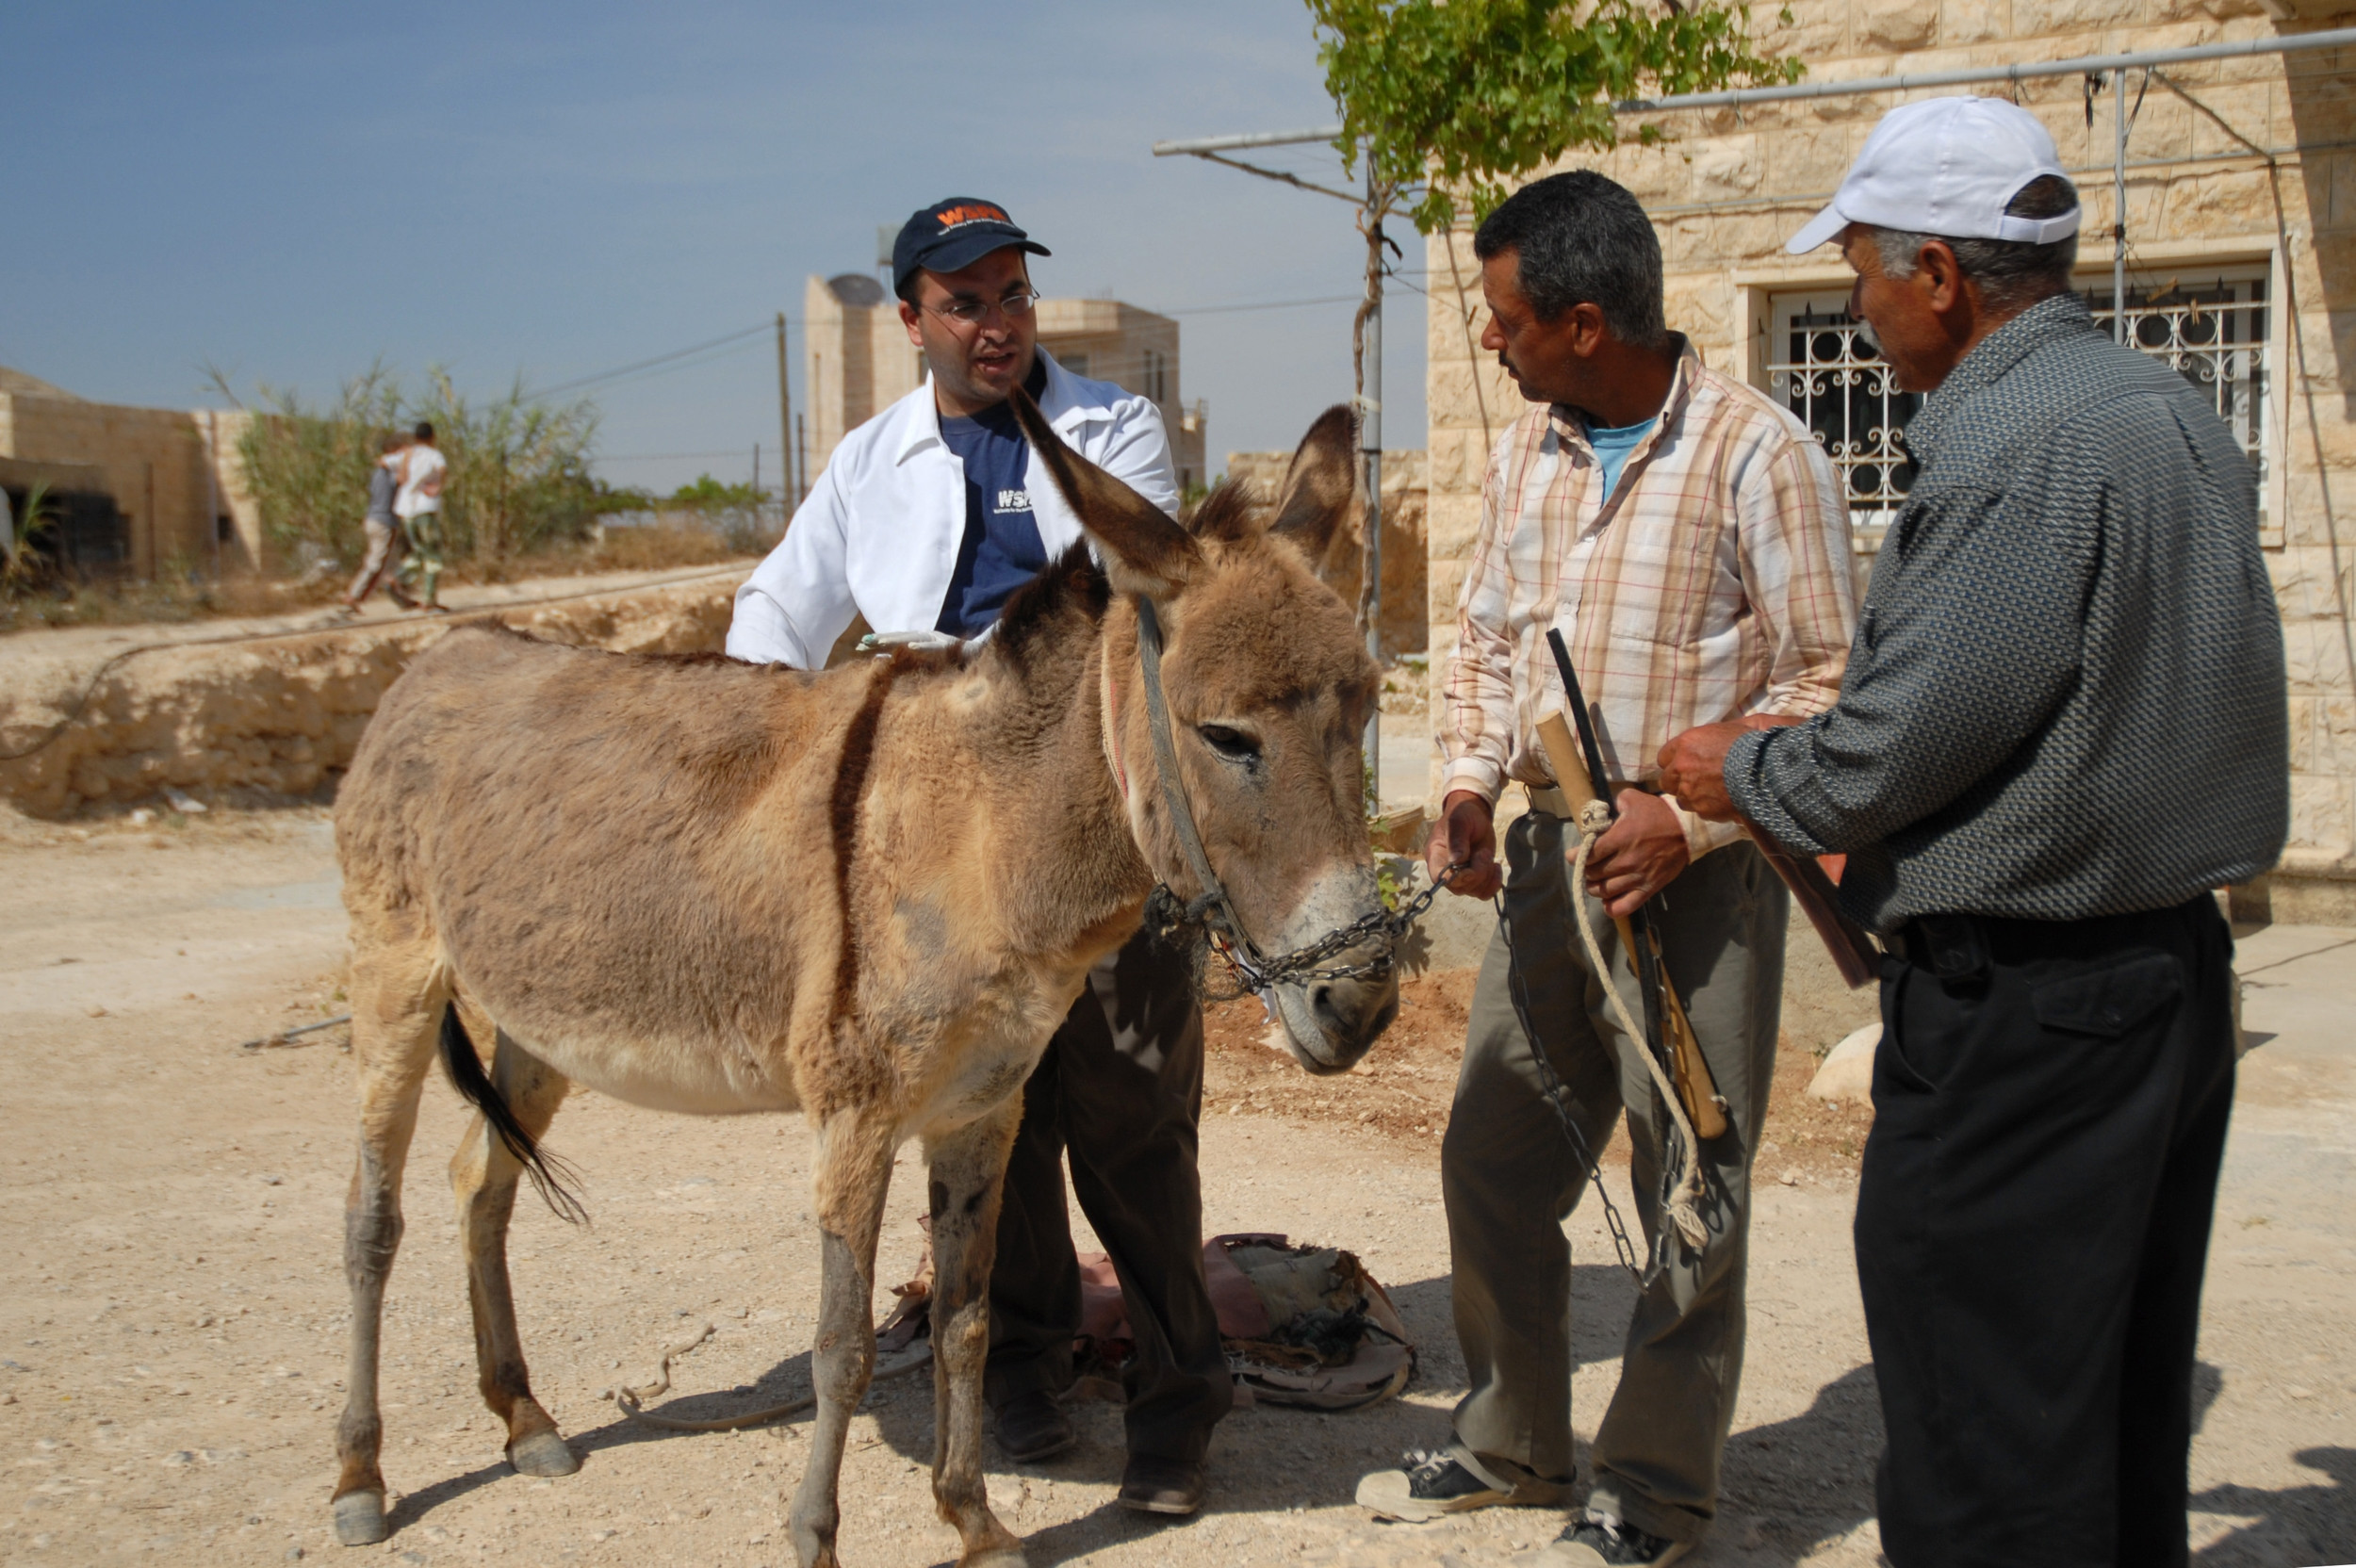 Dr Yousef (left) talks to the donkey's owner (centre) while one of the local facilitators (right) looks on. The facilitator had offered his house as a location for the mobile clinic which shows commitment to the programme.